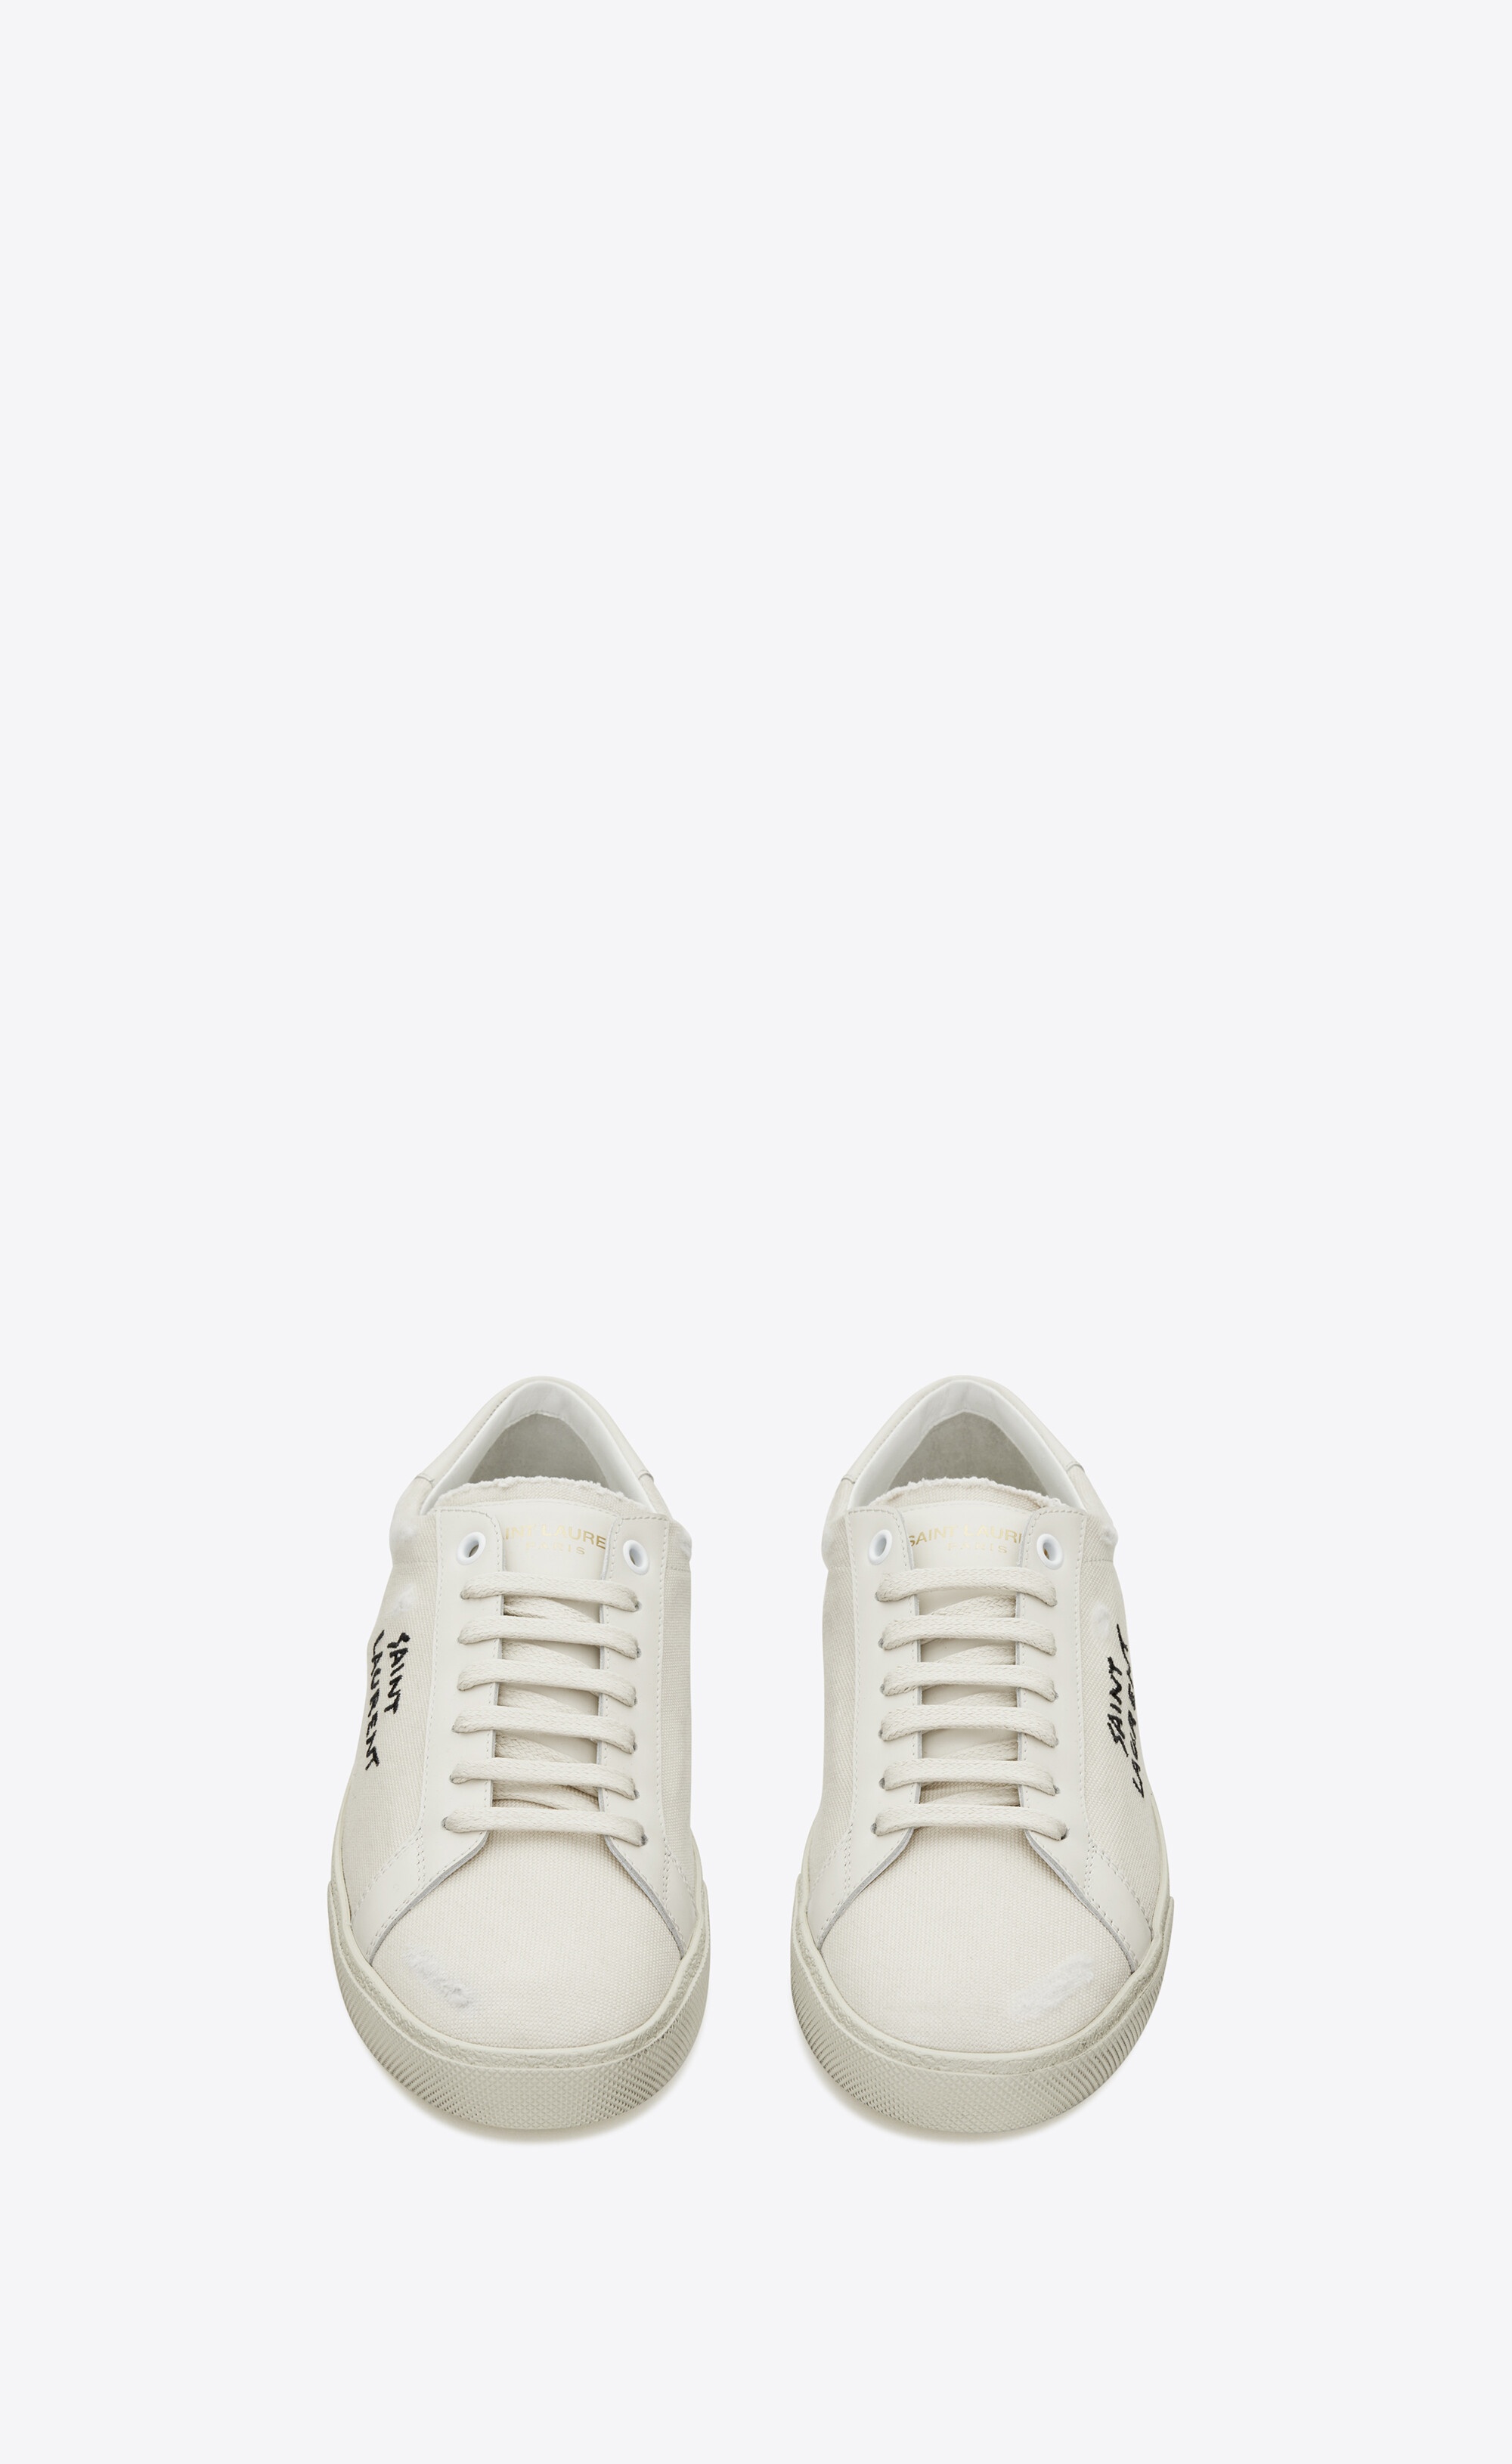 court classic sl/06 embroidered sneakers in canvas and leather - 2